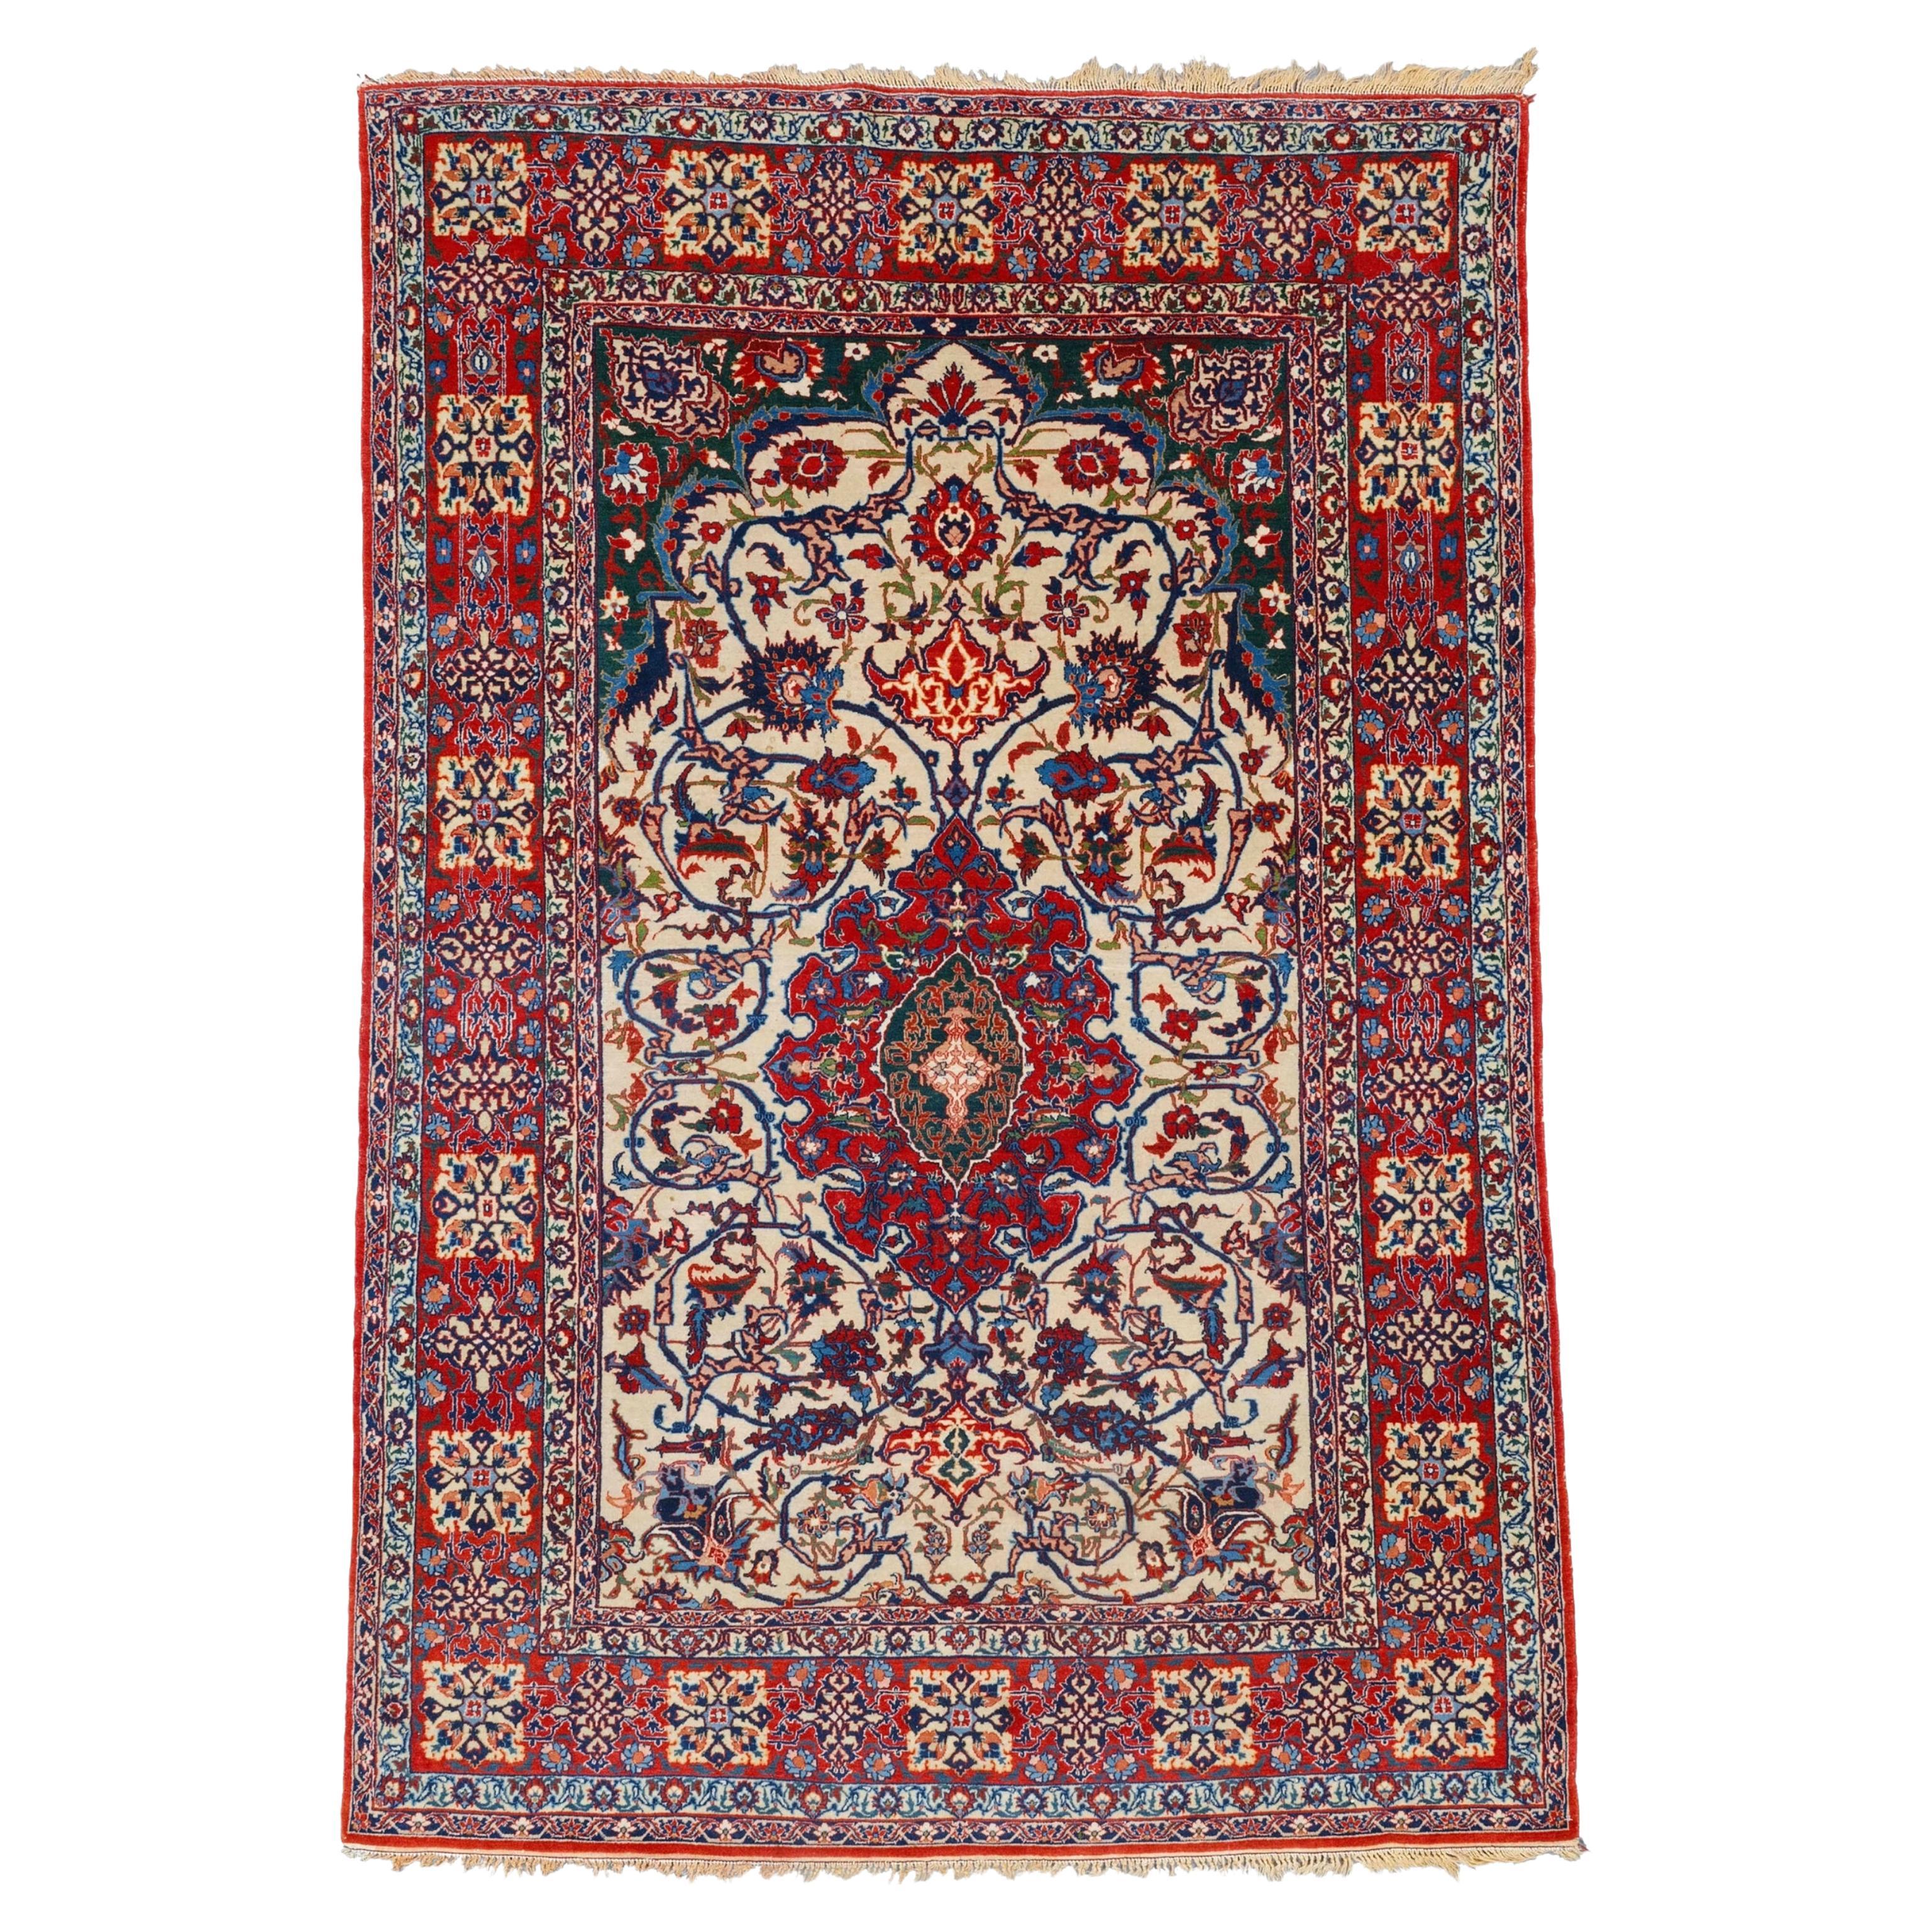 Antique Esfahan Rug - Late of 19th Century Prayer Esfahan Rug, Antique Rug For Sale